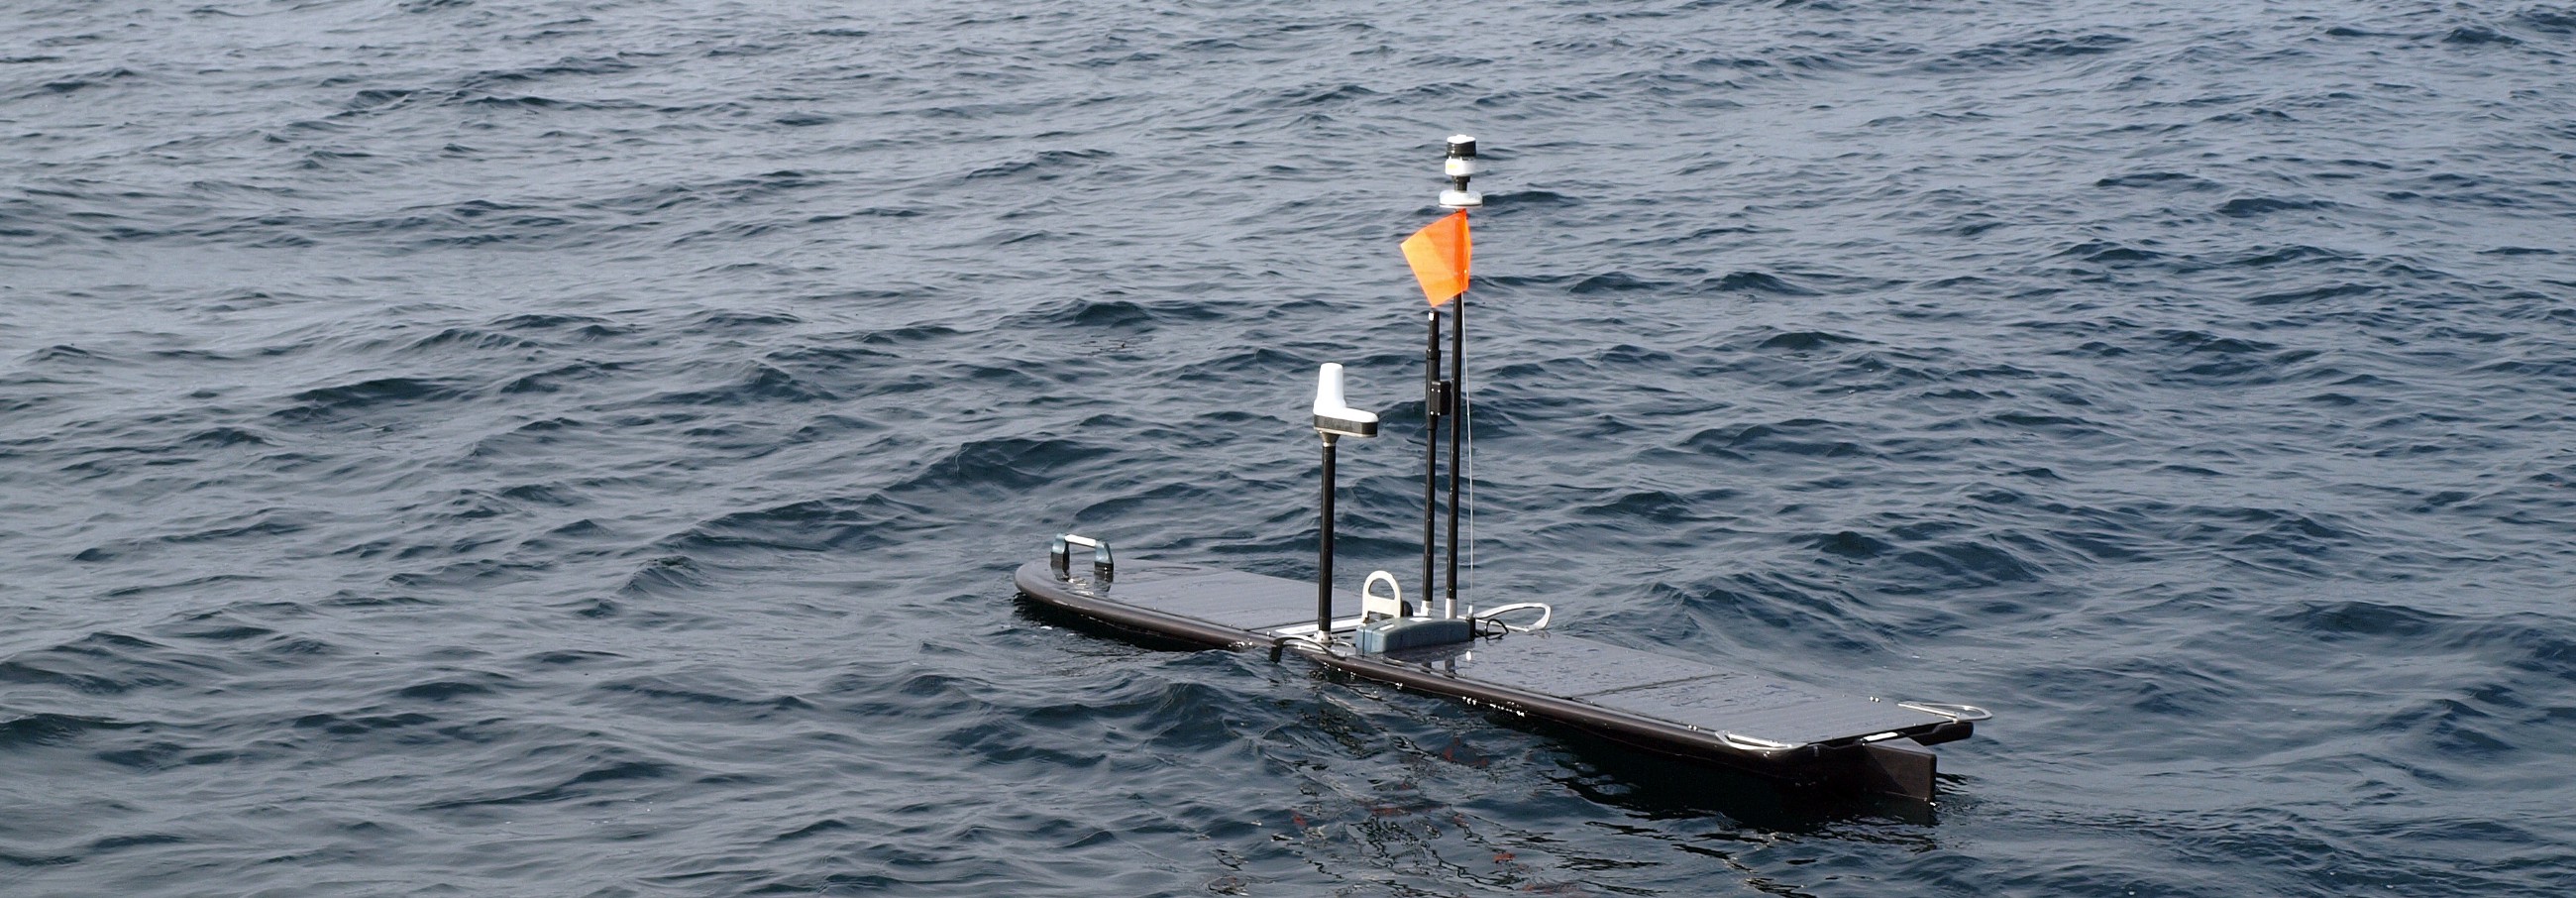 An autonomous underwater drone floats at the surface of the sea, with its antennae and top deck poking above the waves.